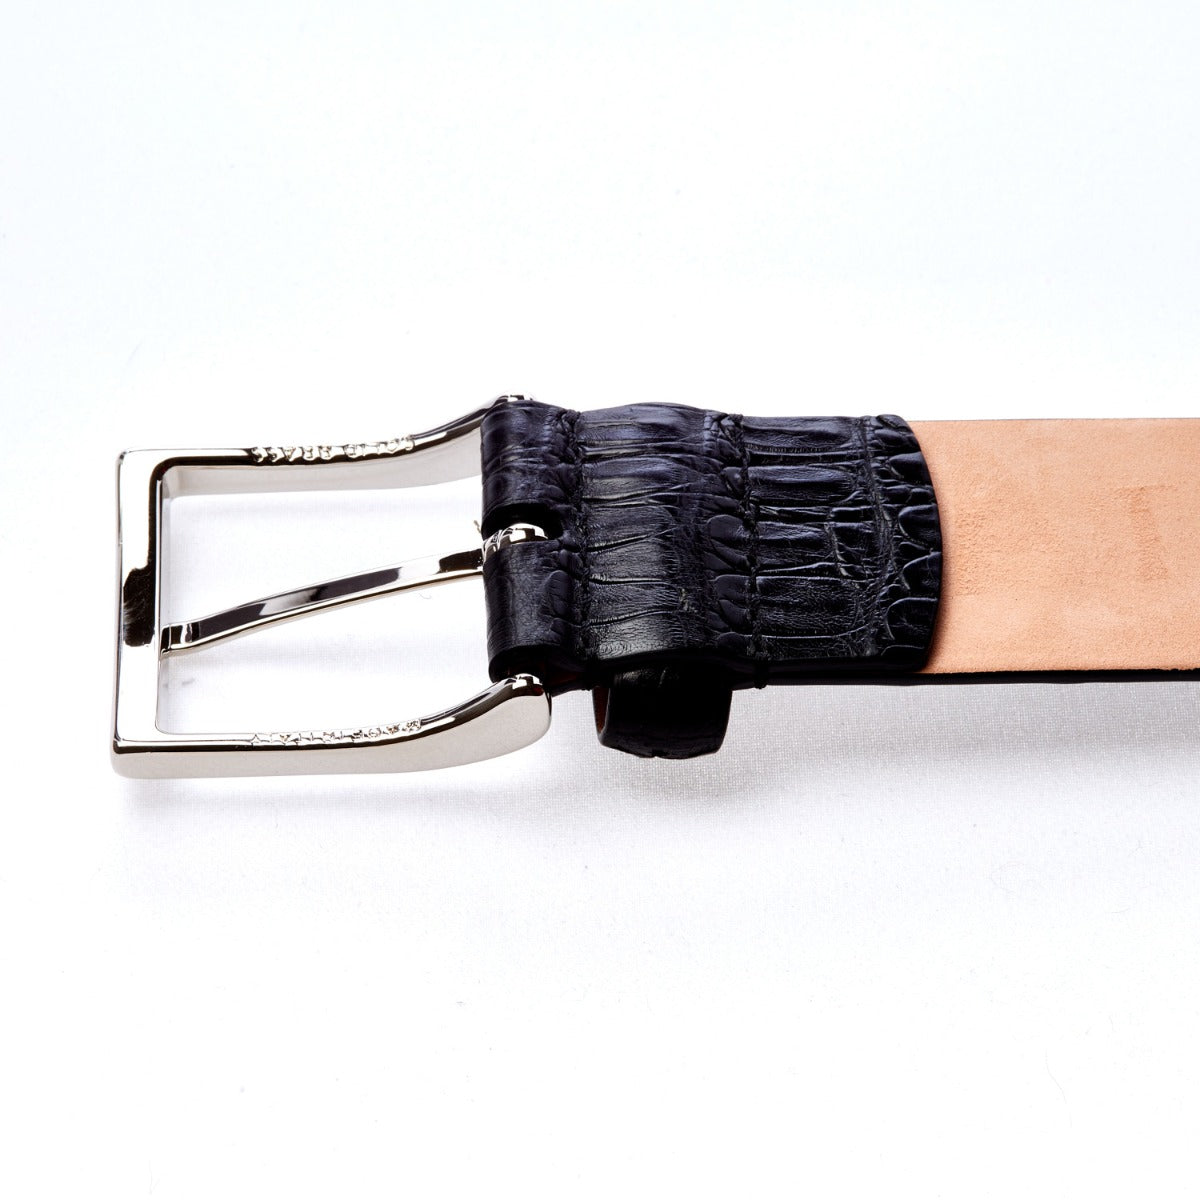 A Sovereign Grade Black Crocodile Belt by KirbyAllison.com, handcrafted with a satin finish on a white background, perfect for crocodile belt enthusiasts.